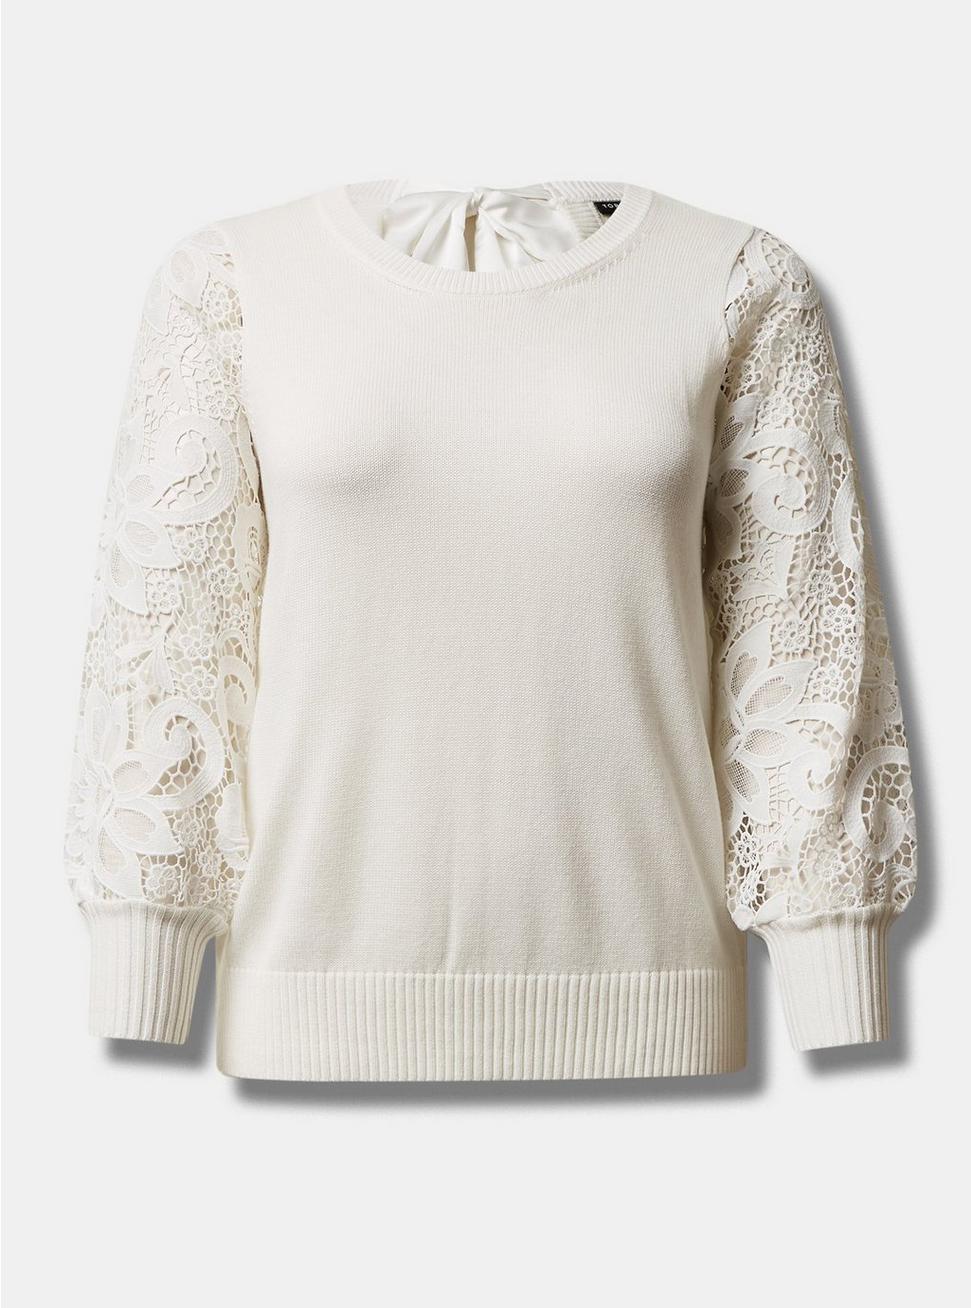 Pullover Lace Sleeve Sweater, WHITE, hi-res